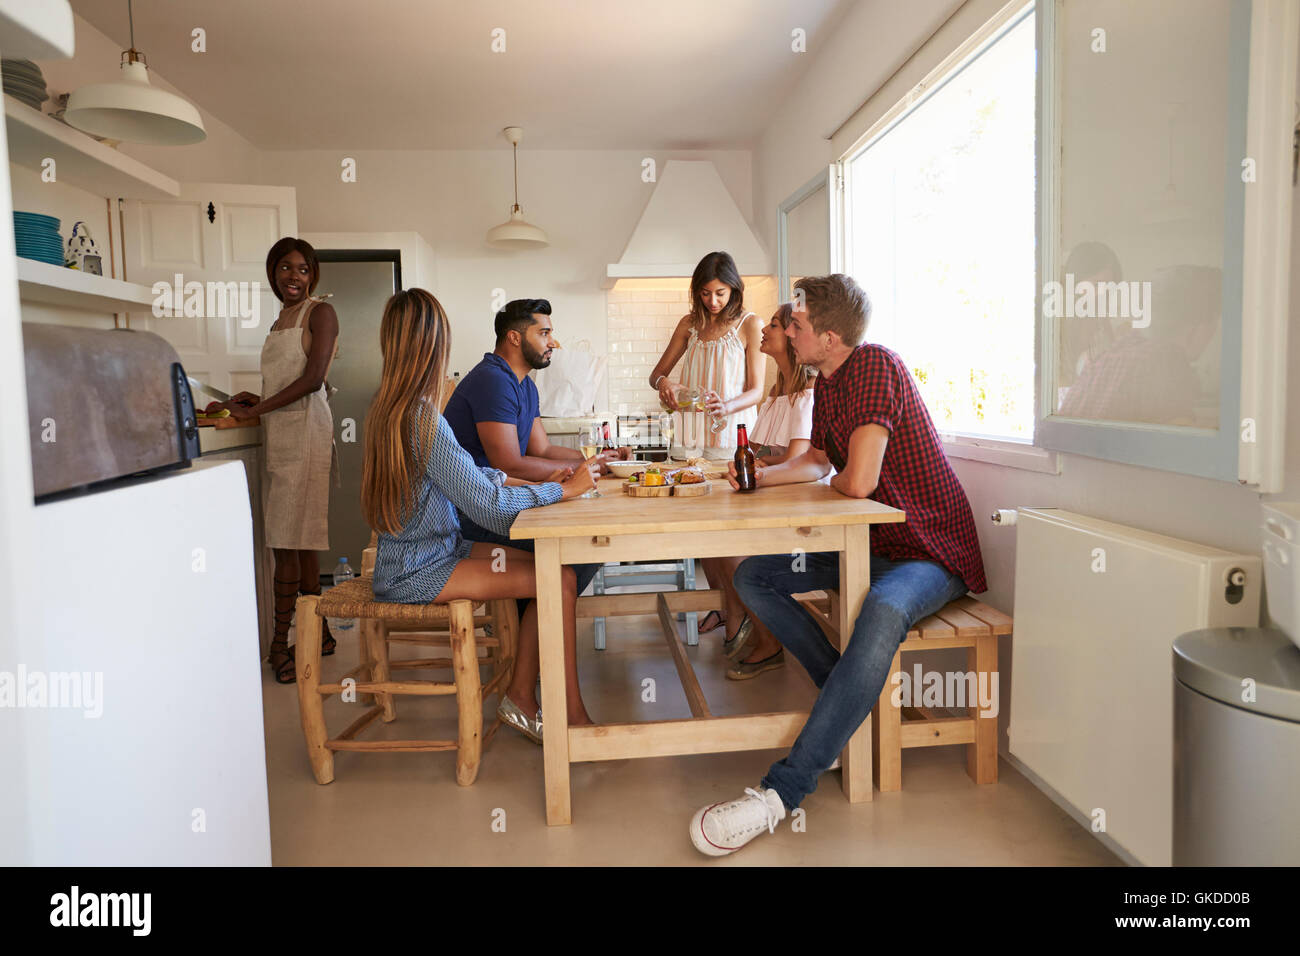 Group of friends at dinner party, one of them preparing food Stock Photo